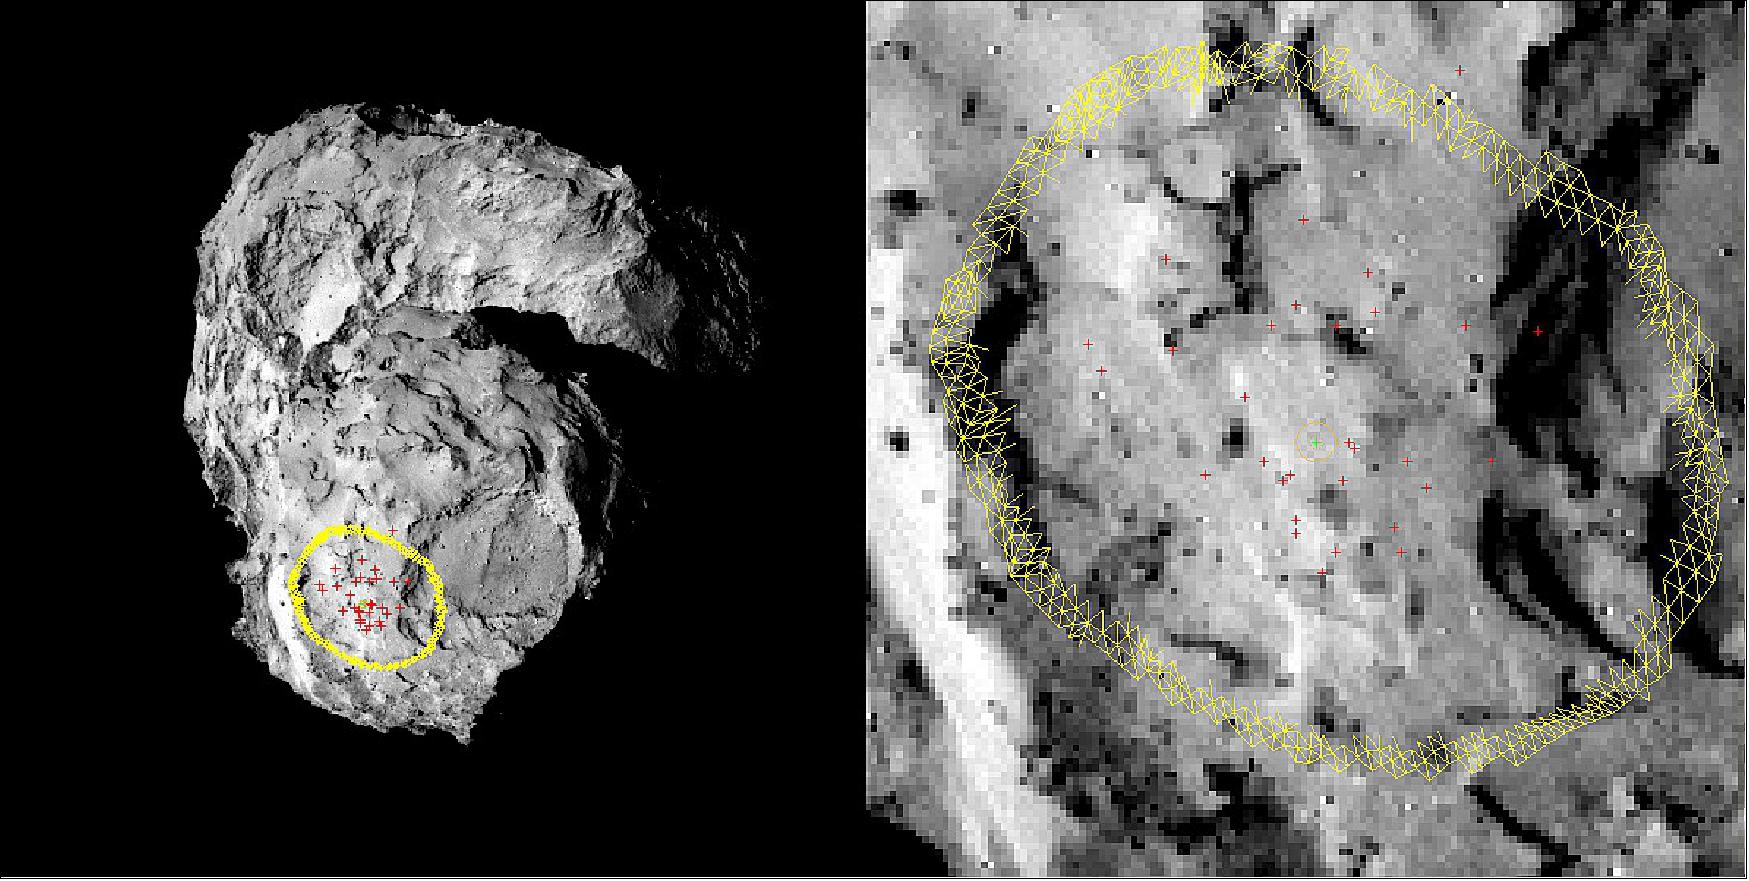 Figure 123: Landing points of simulated trajectories plotted on top of a NAVCAM image (image credit: Rosetta navigation team, ESA